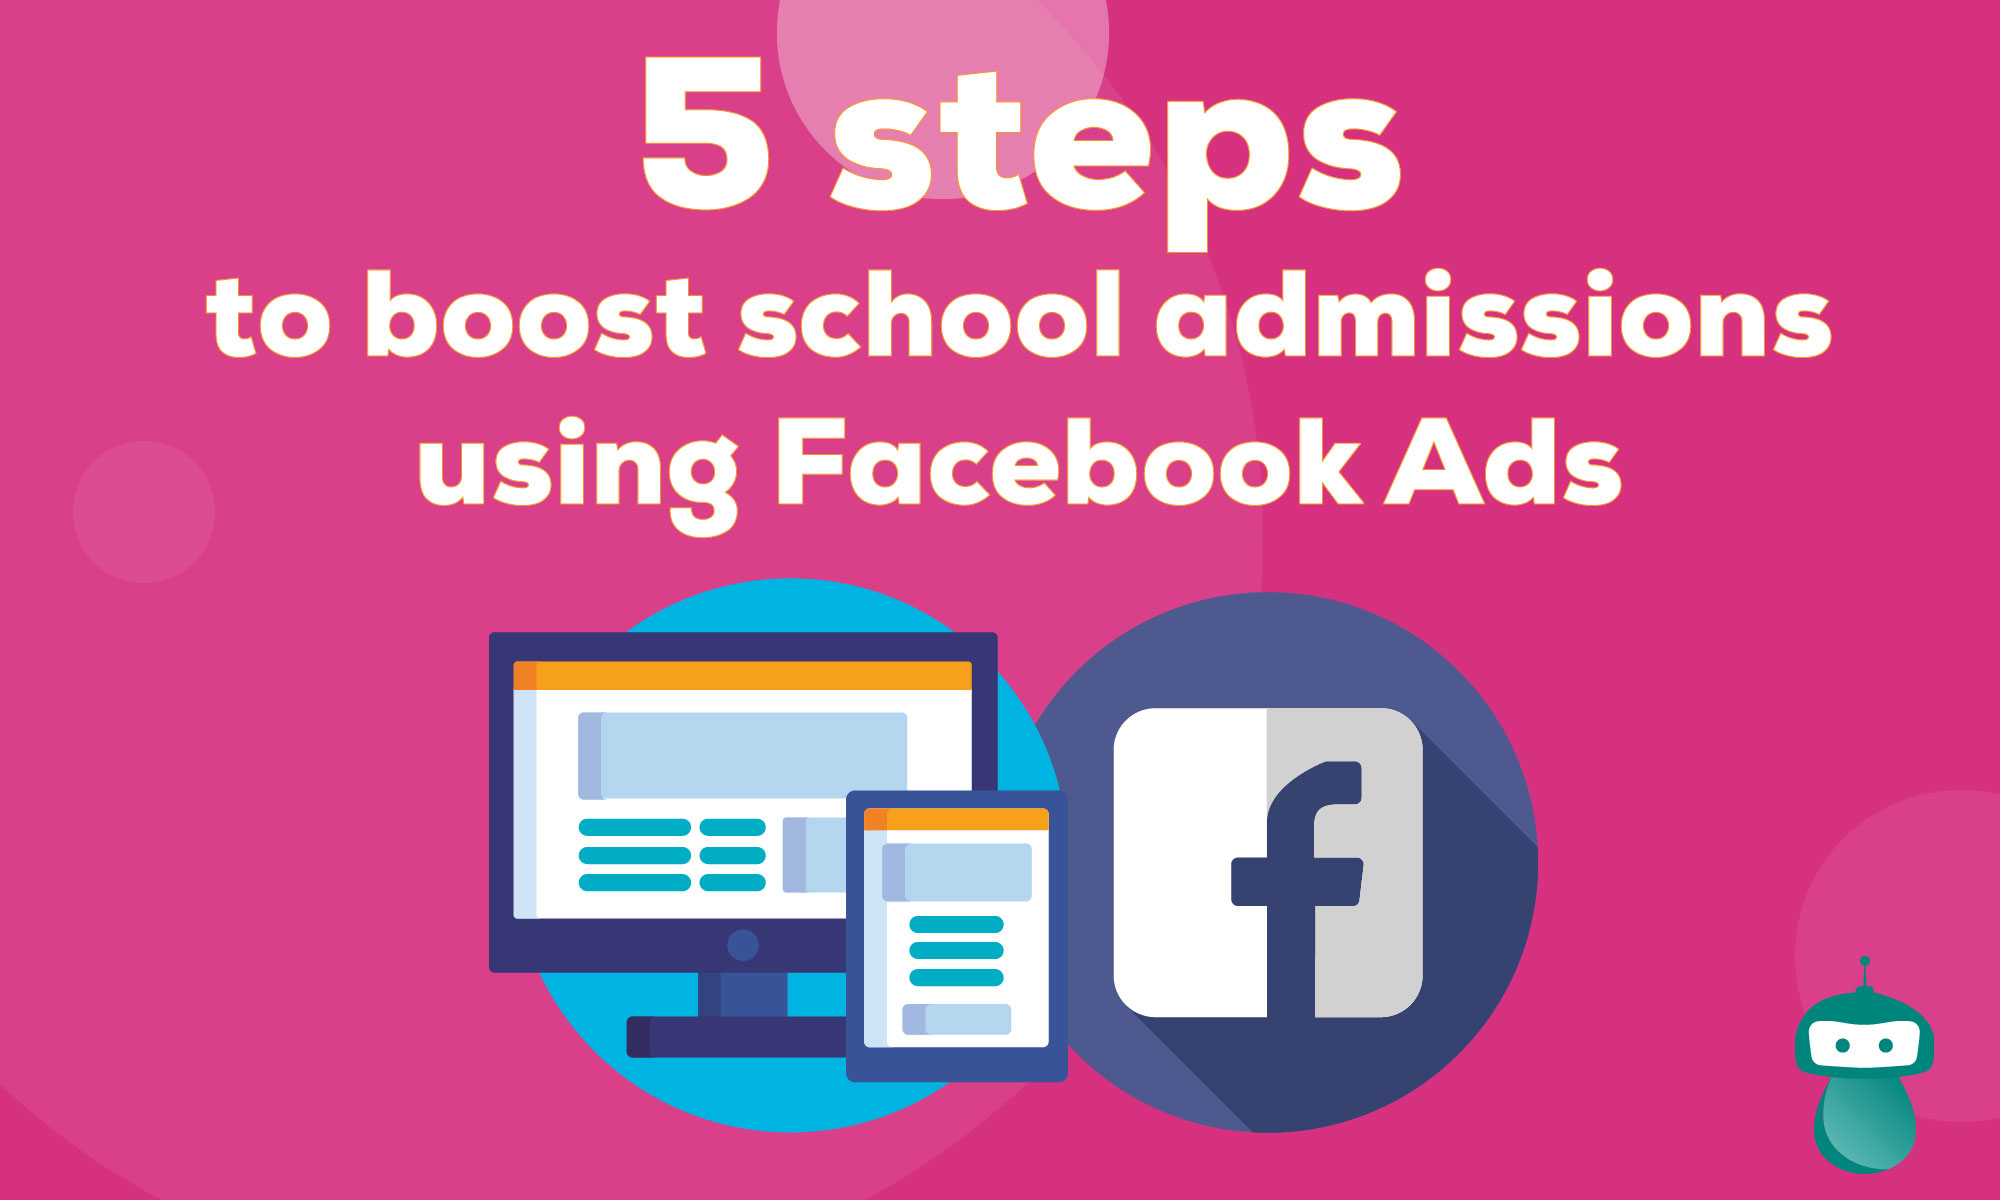 5 Steps to improve your school admissions with Facebook Ads